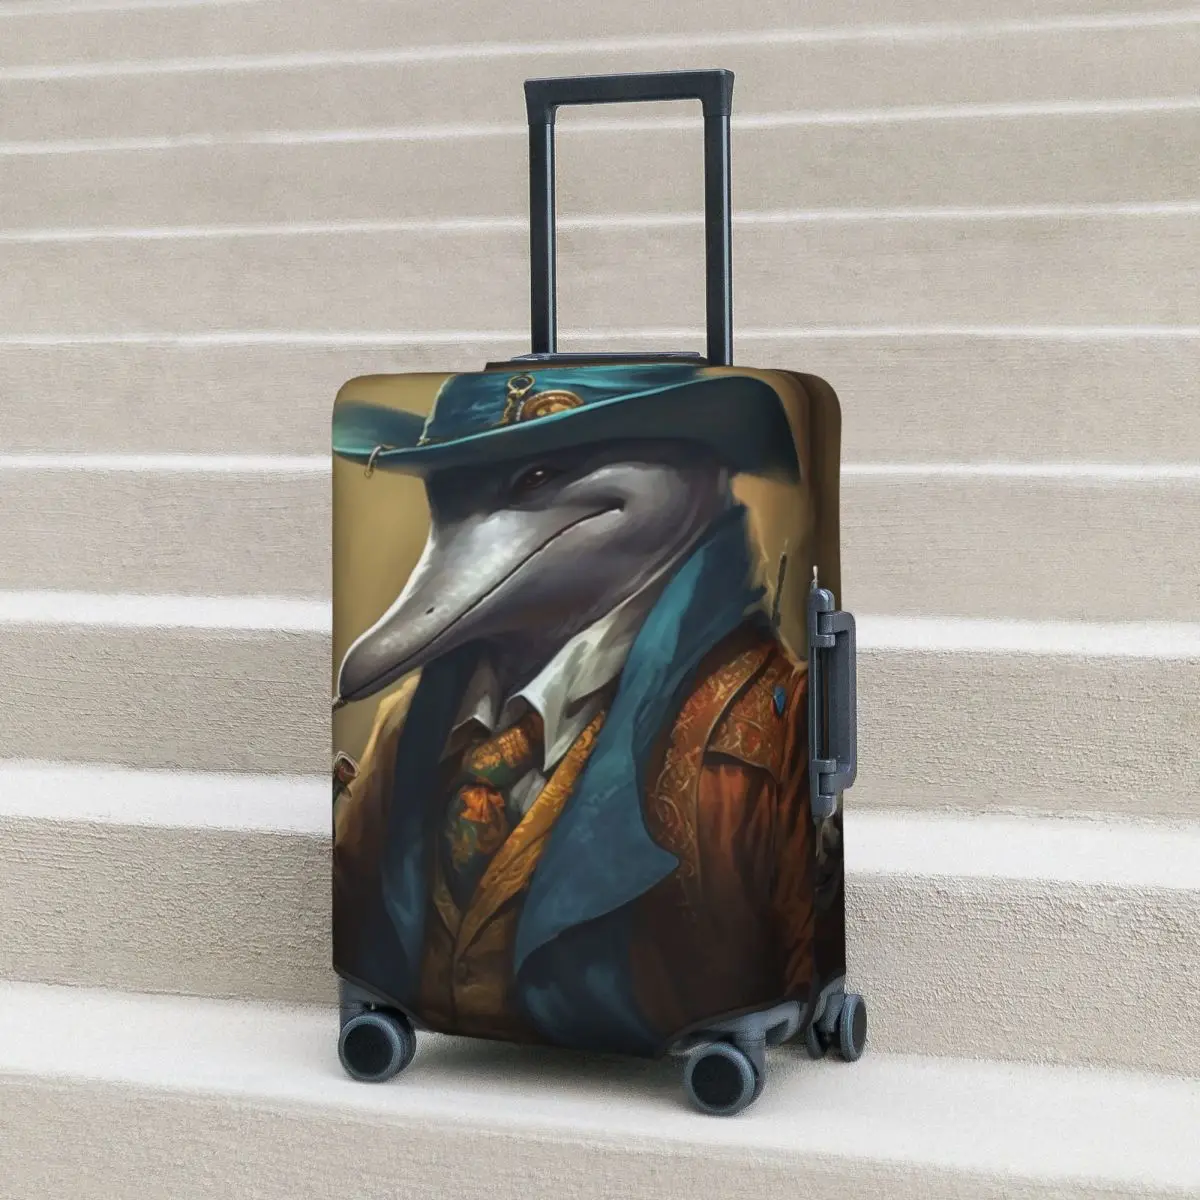 

Dolphin Suitcase Cover Gangster-style Godfather Flight Business Practical Luggage Accesories Protection